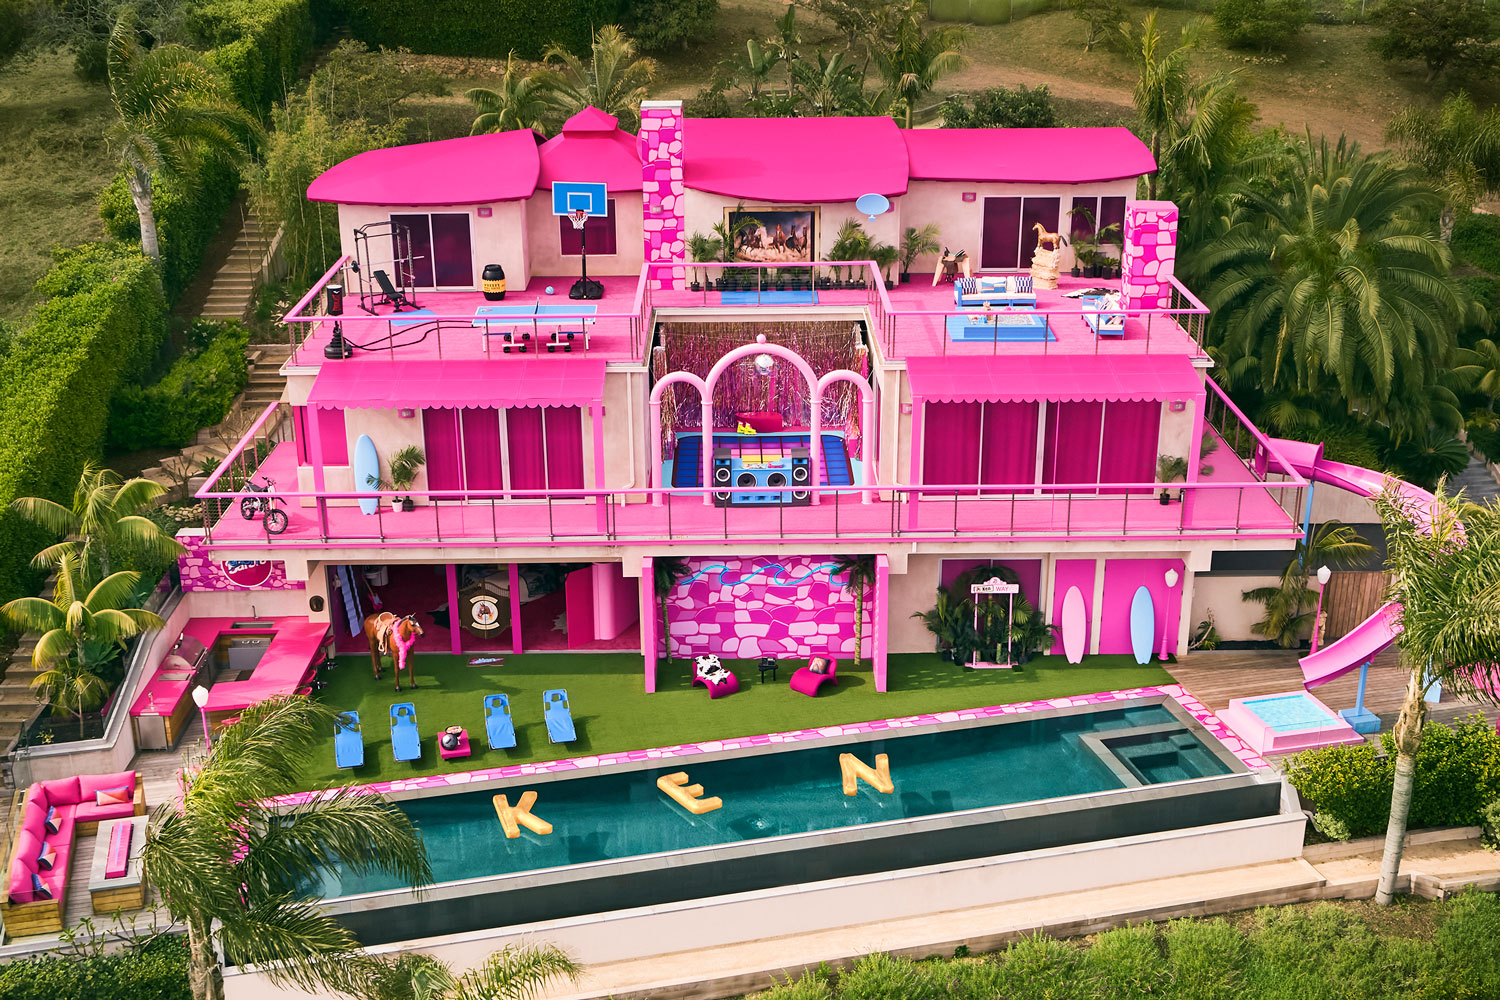 6 Design Lessons From 6 Decades of Barbie Dreamhouses